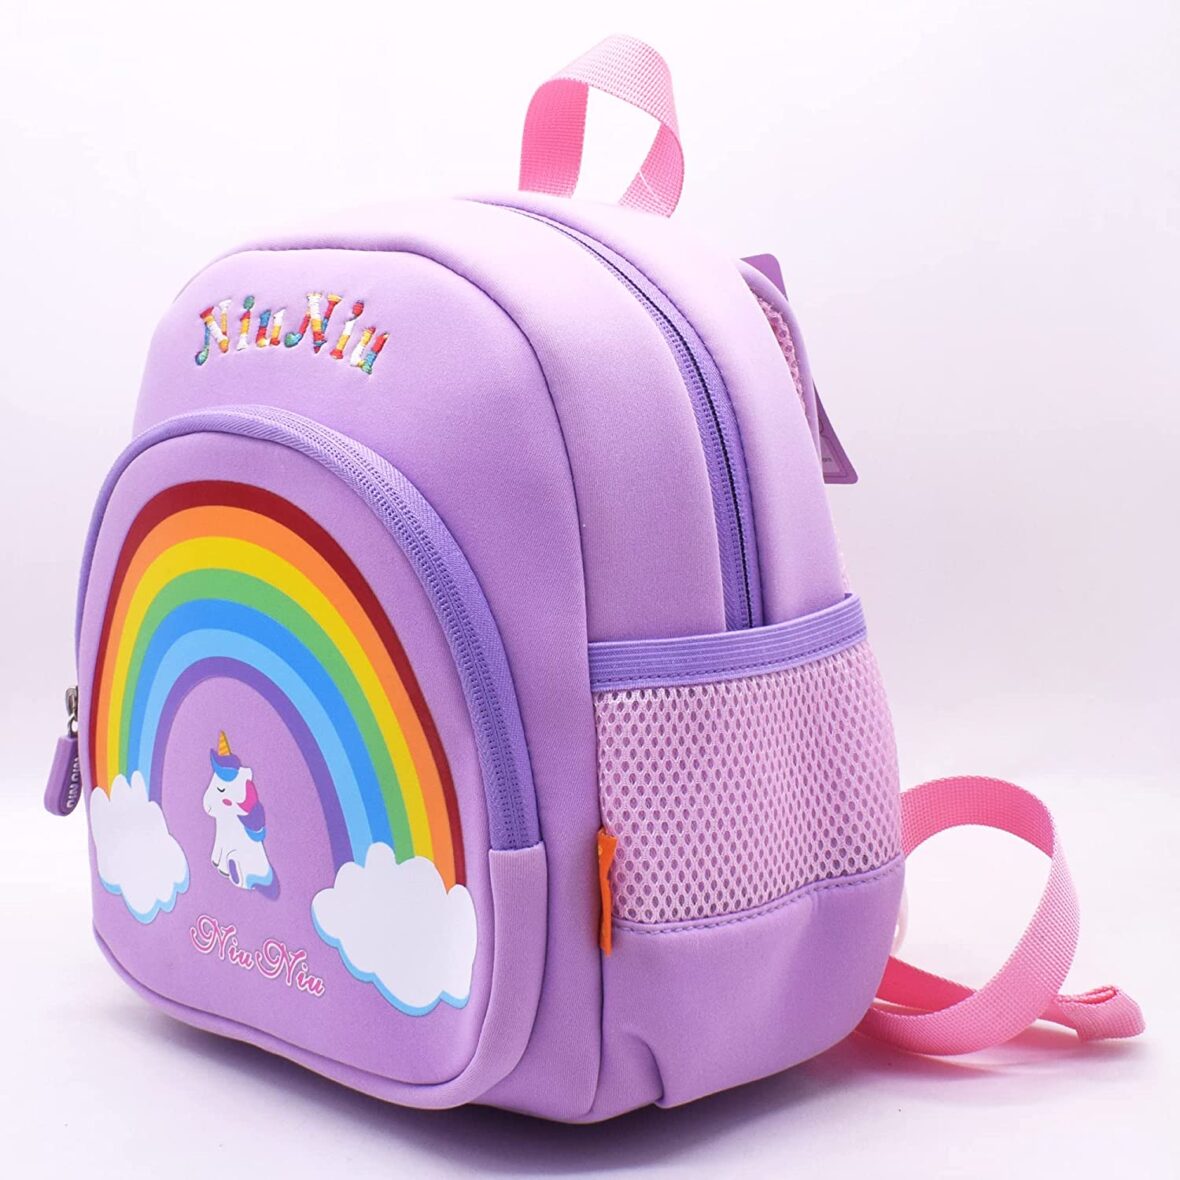 U smile Toddler Backpack, My Dreamy Unicorn, Baby Boys Girls Kindergarten Pre School Bag for Toddlers Age 2 to 5 Years, Purple